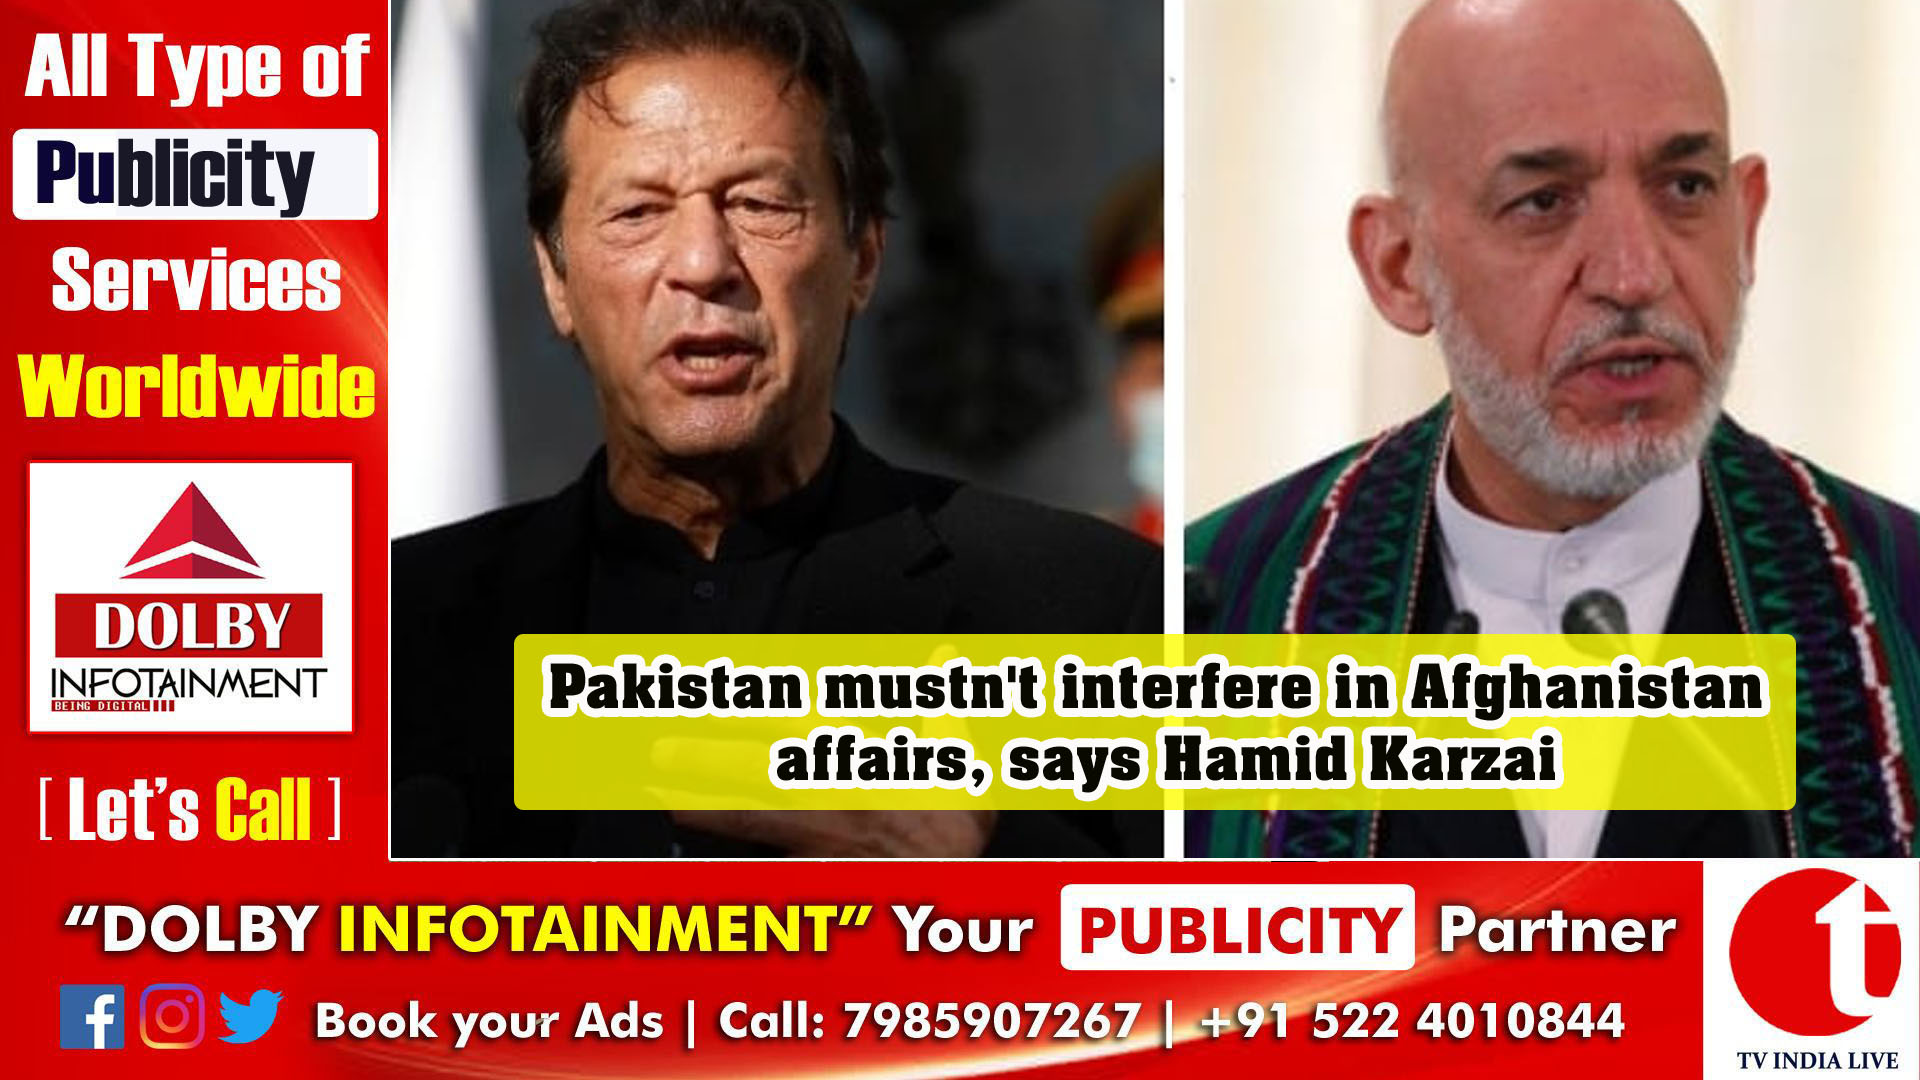 Pakistan mustn't interfere in Afghanistan affairs, says Hamid Karzai